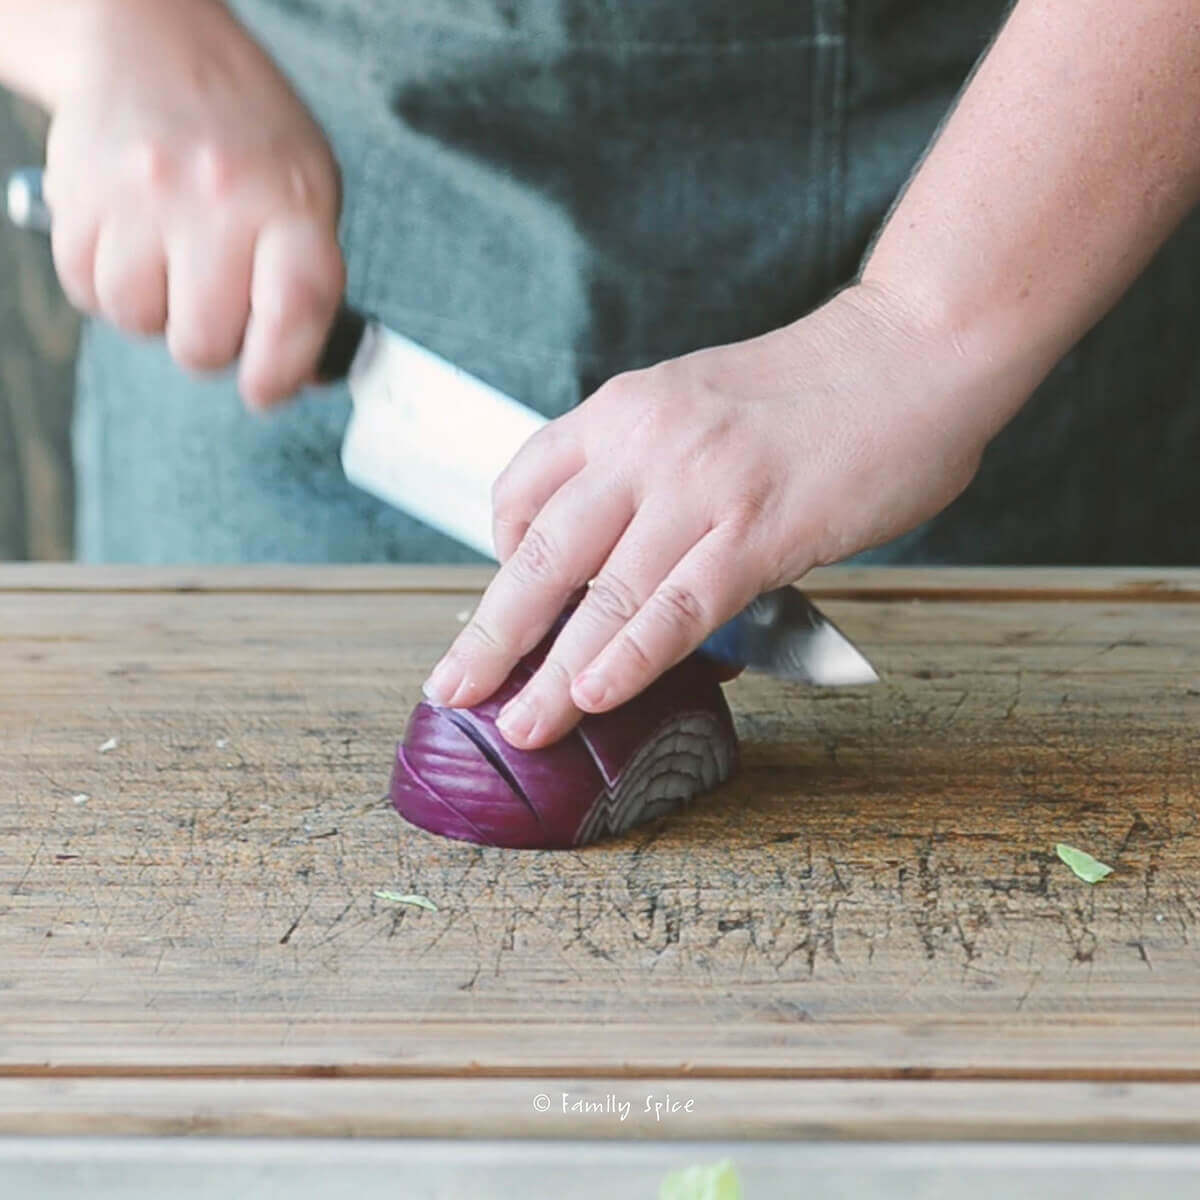 Cutting a red onion into wedges on a wooden cutting board